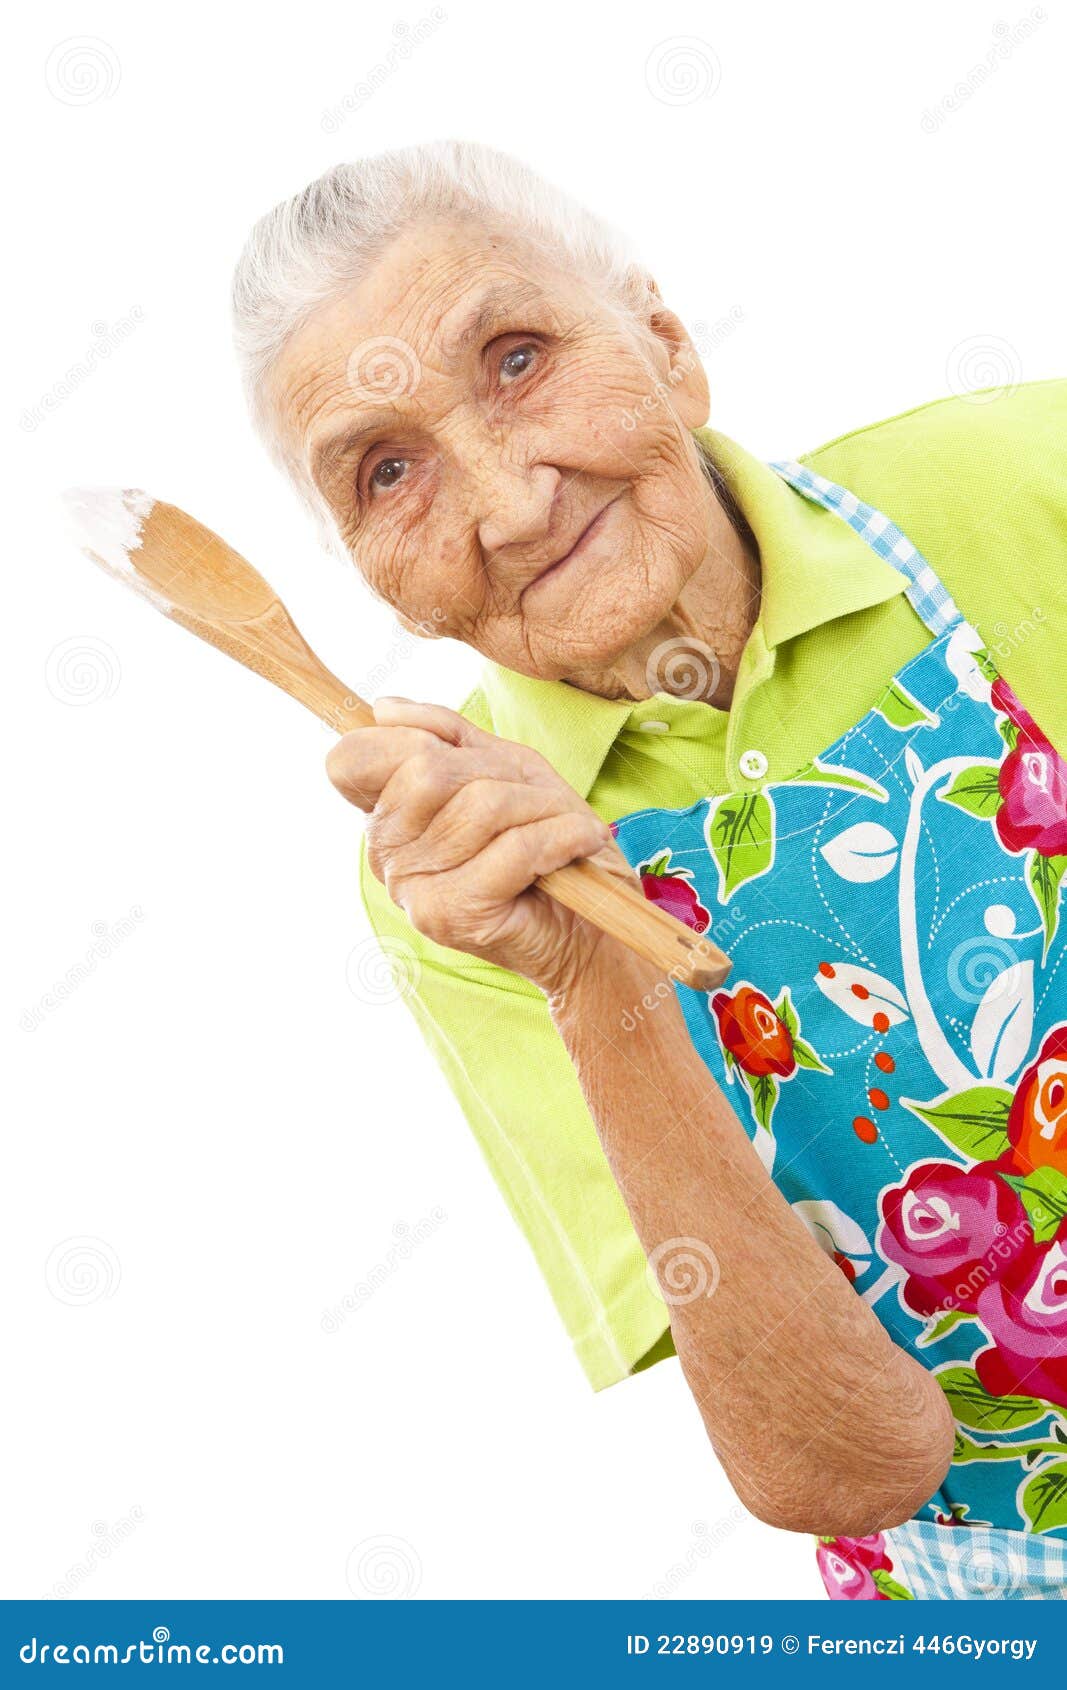 Happy old woman with wooden spoon - happy-old-woman-wooden-spoon-22890919